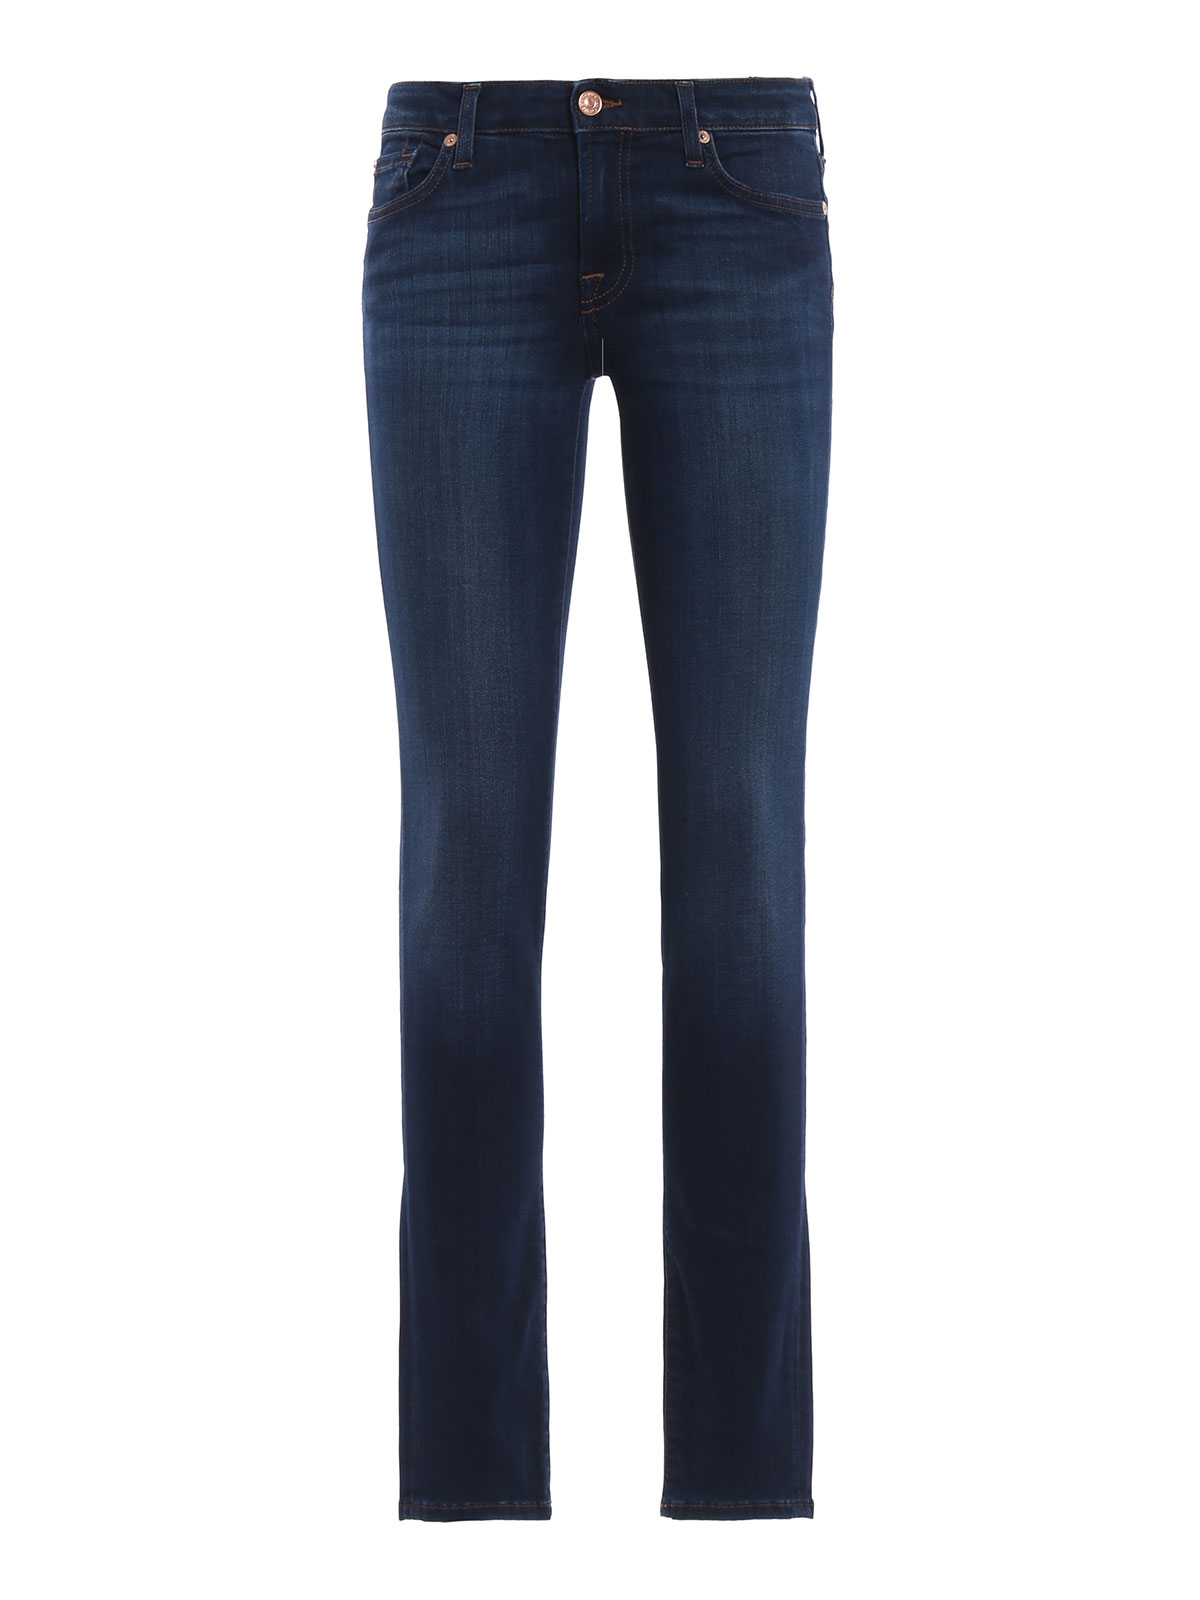 Straight leg jeans 7 For All Mankind - Pyper Slim Illusion Luxe ...